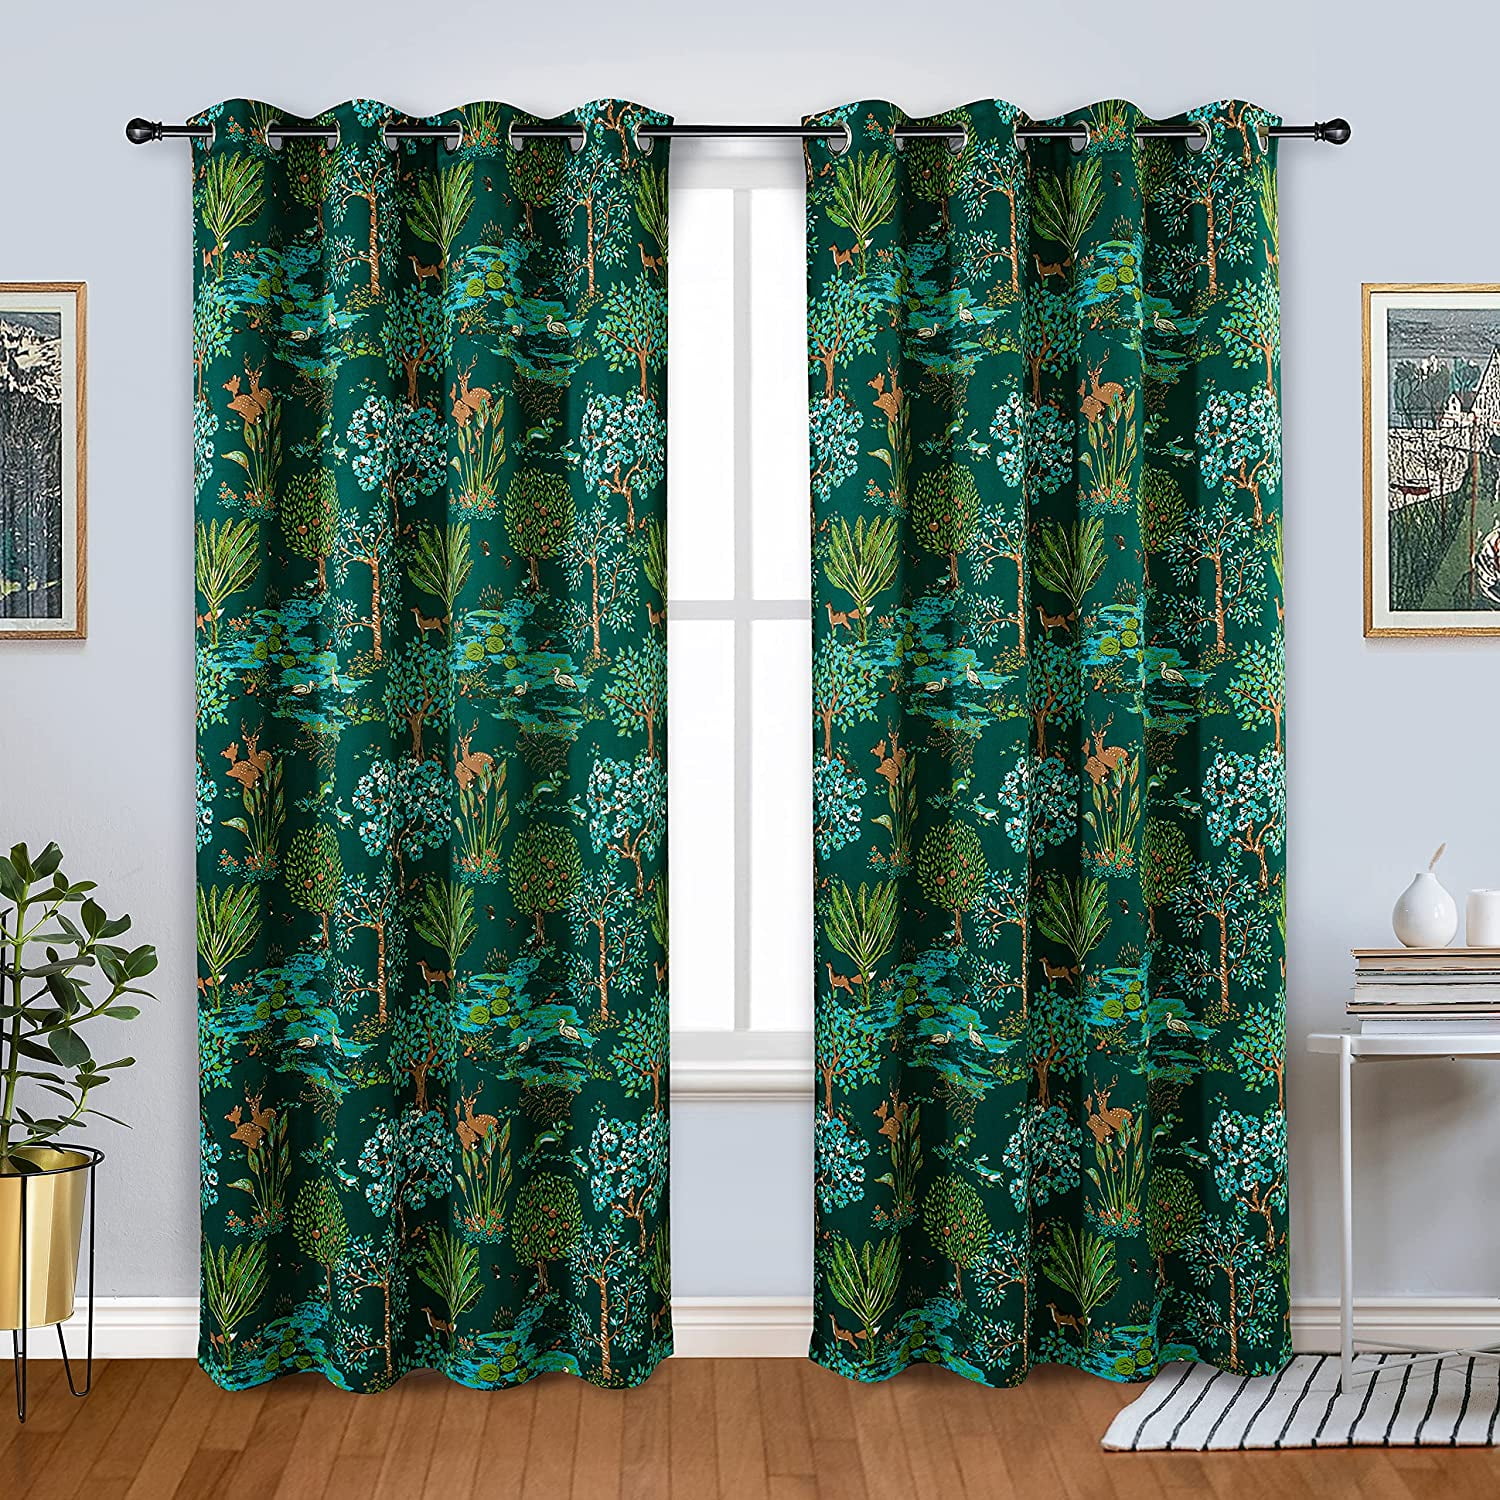 Details about   2 Panels Forest Scenery Window Curtains Blackout Window Drapes Living Room Decor 